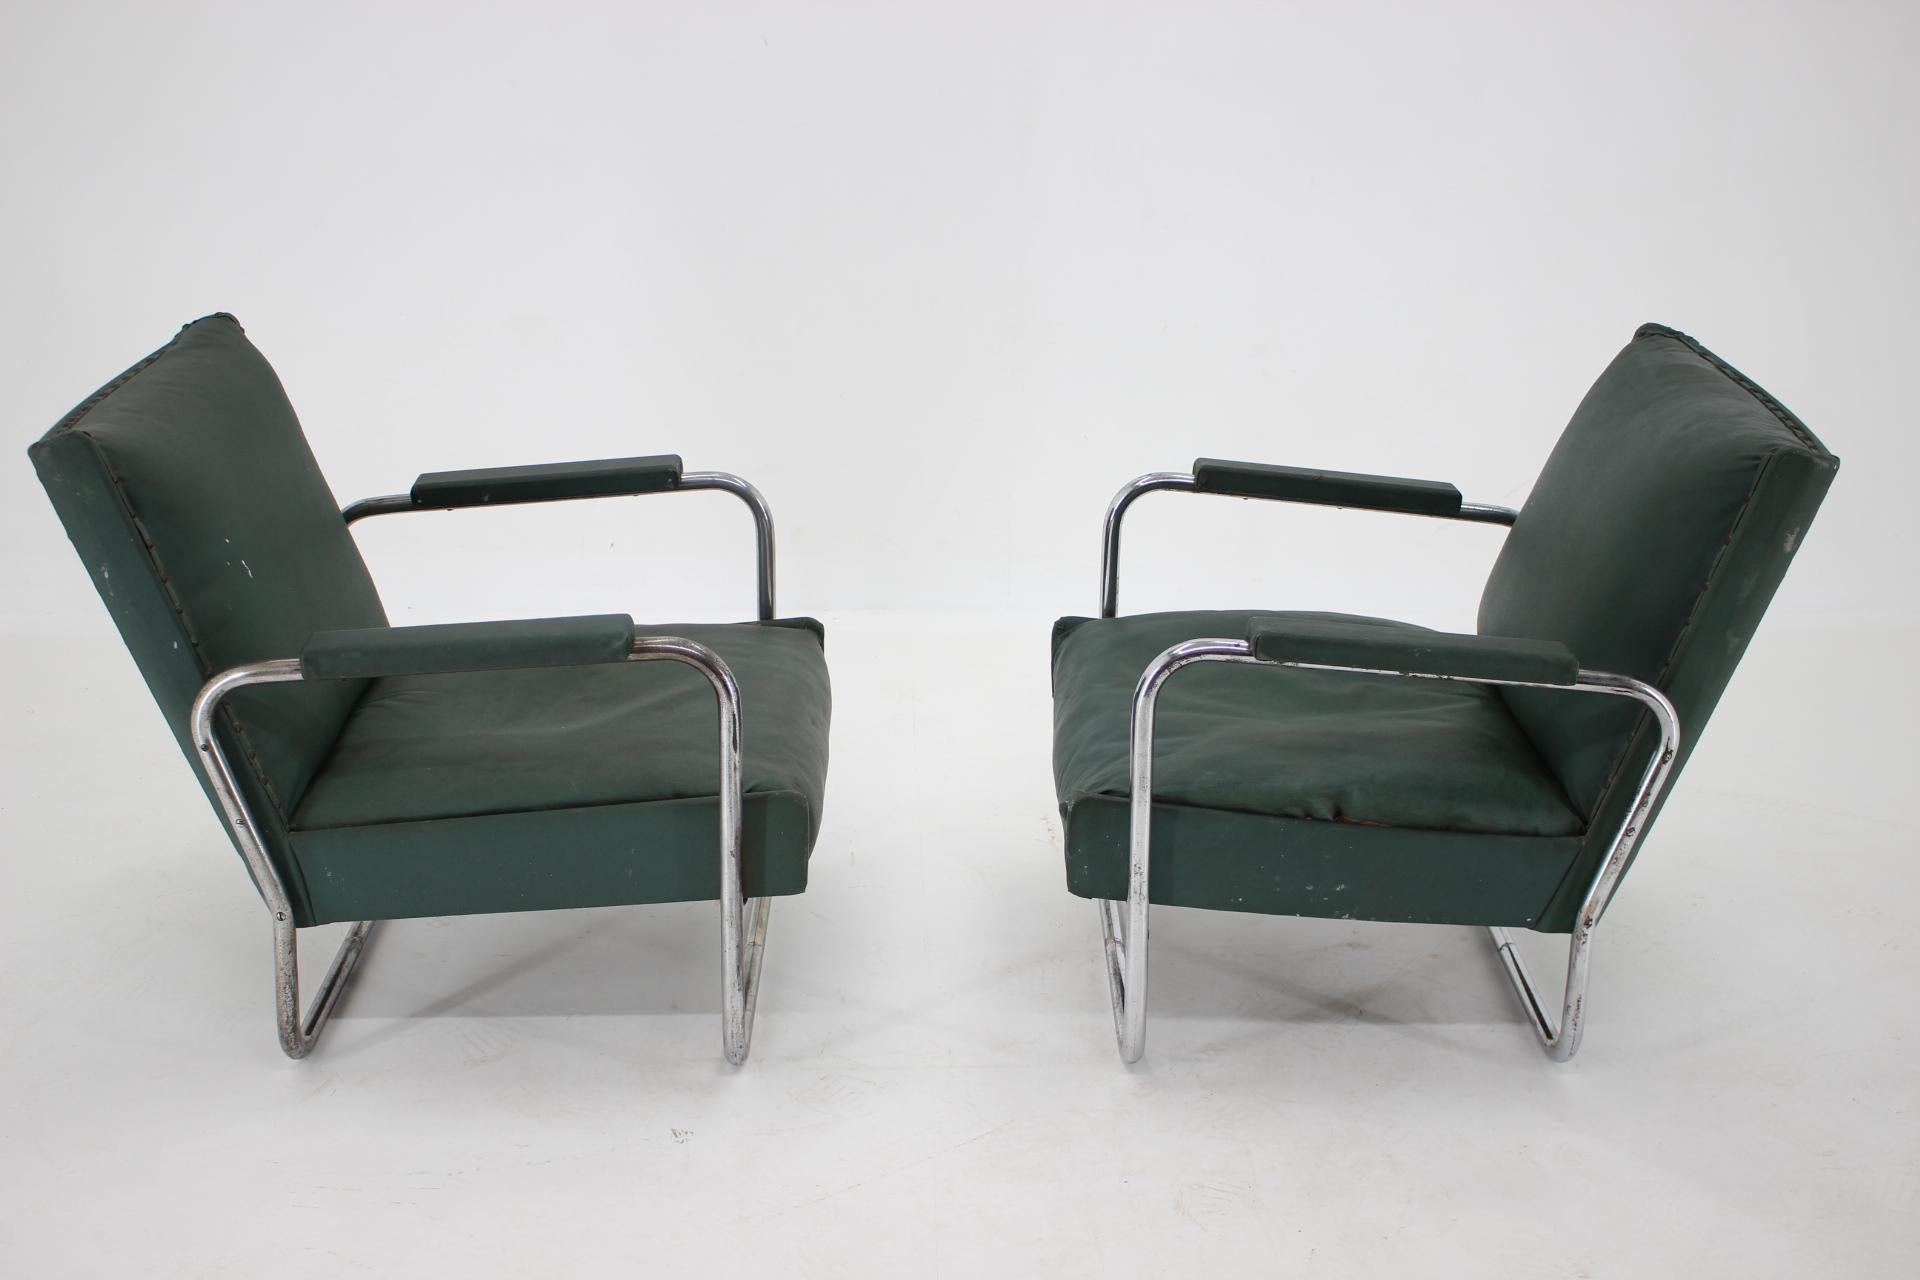 Early Pair of Bauhaus Chrome Armchairs KF-406 by Walter Knoll for Thonet, 1930s For Sale 5